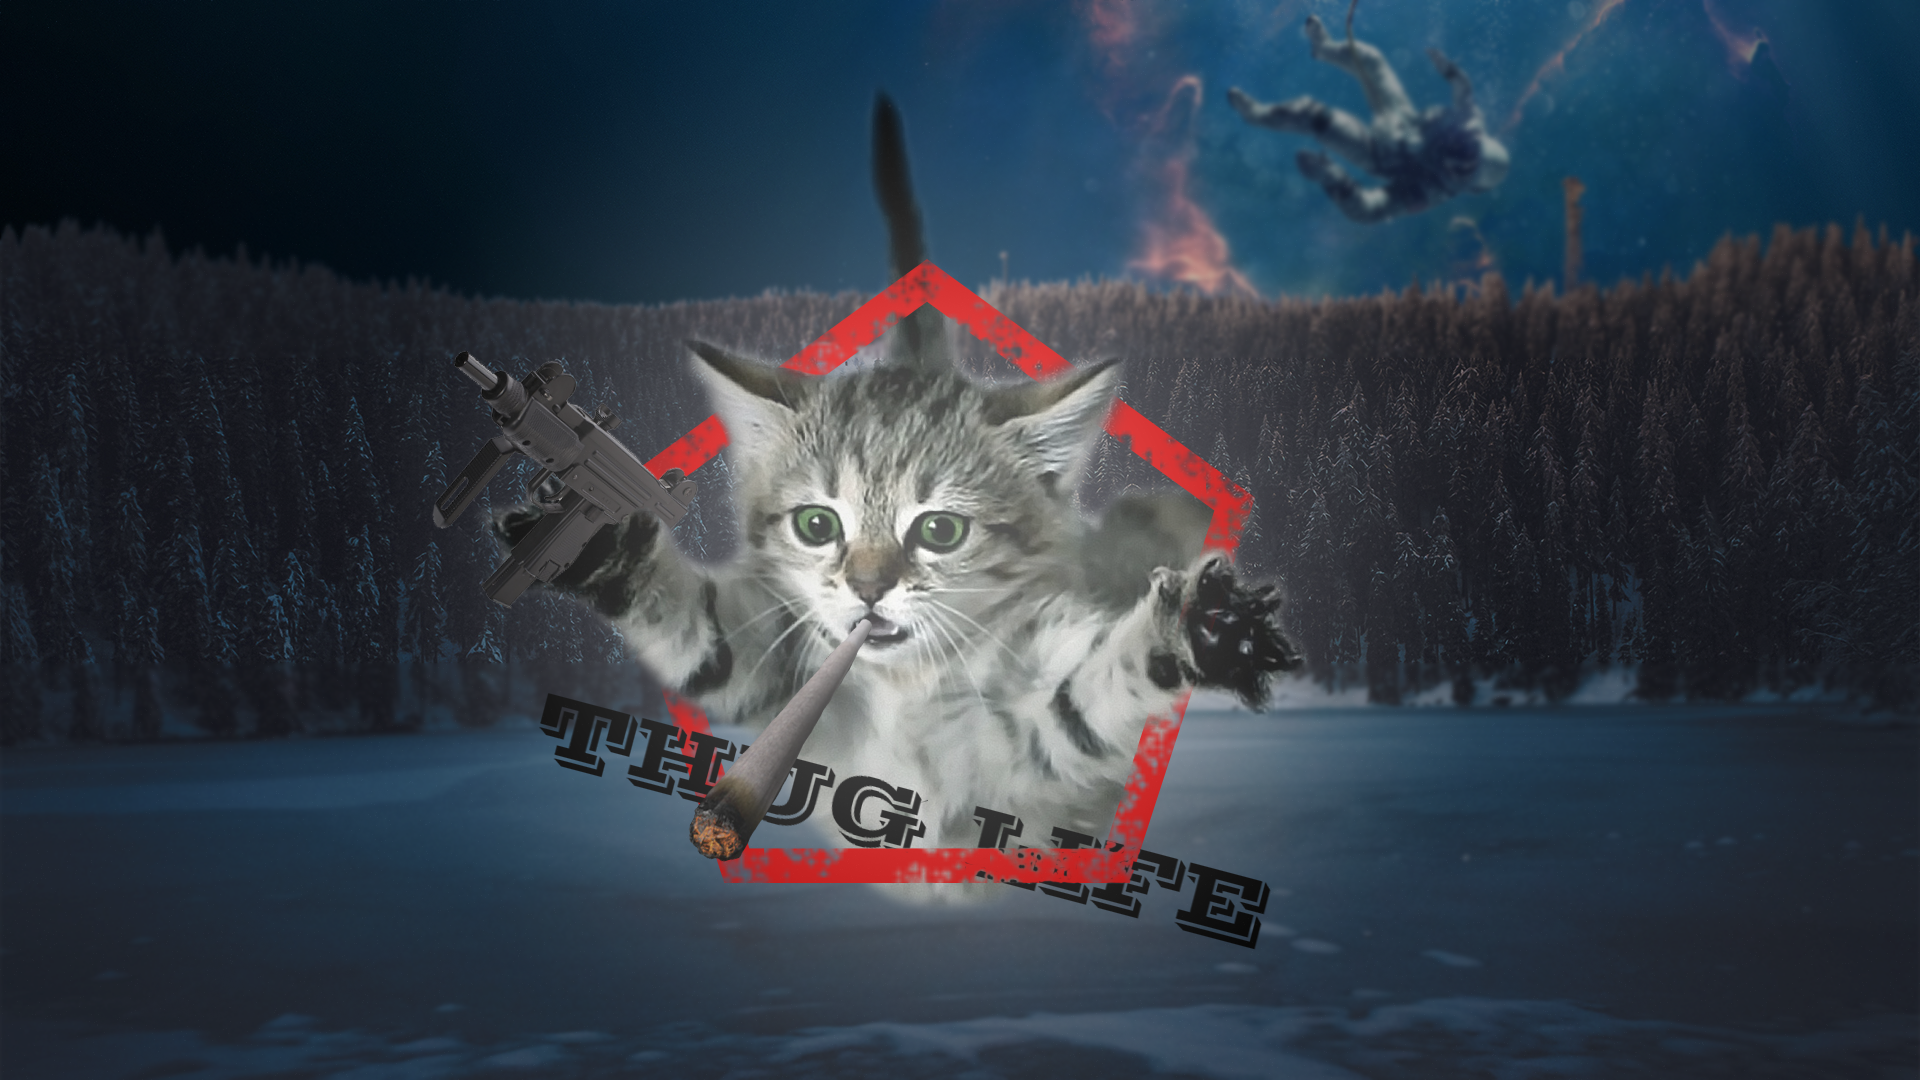 General 1920x1080 cats gangster astronaut forest lake